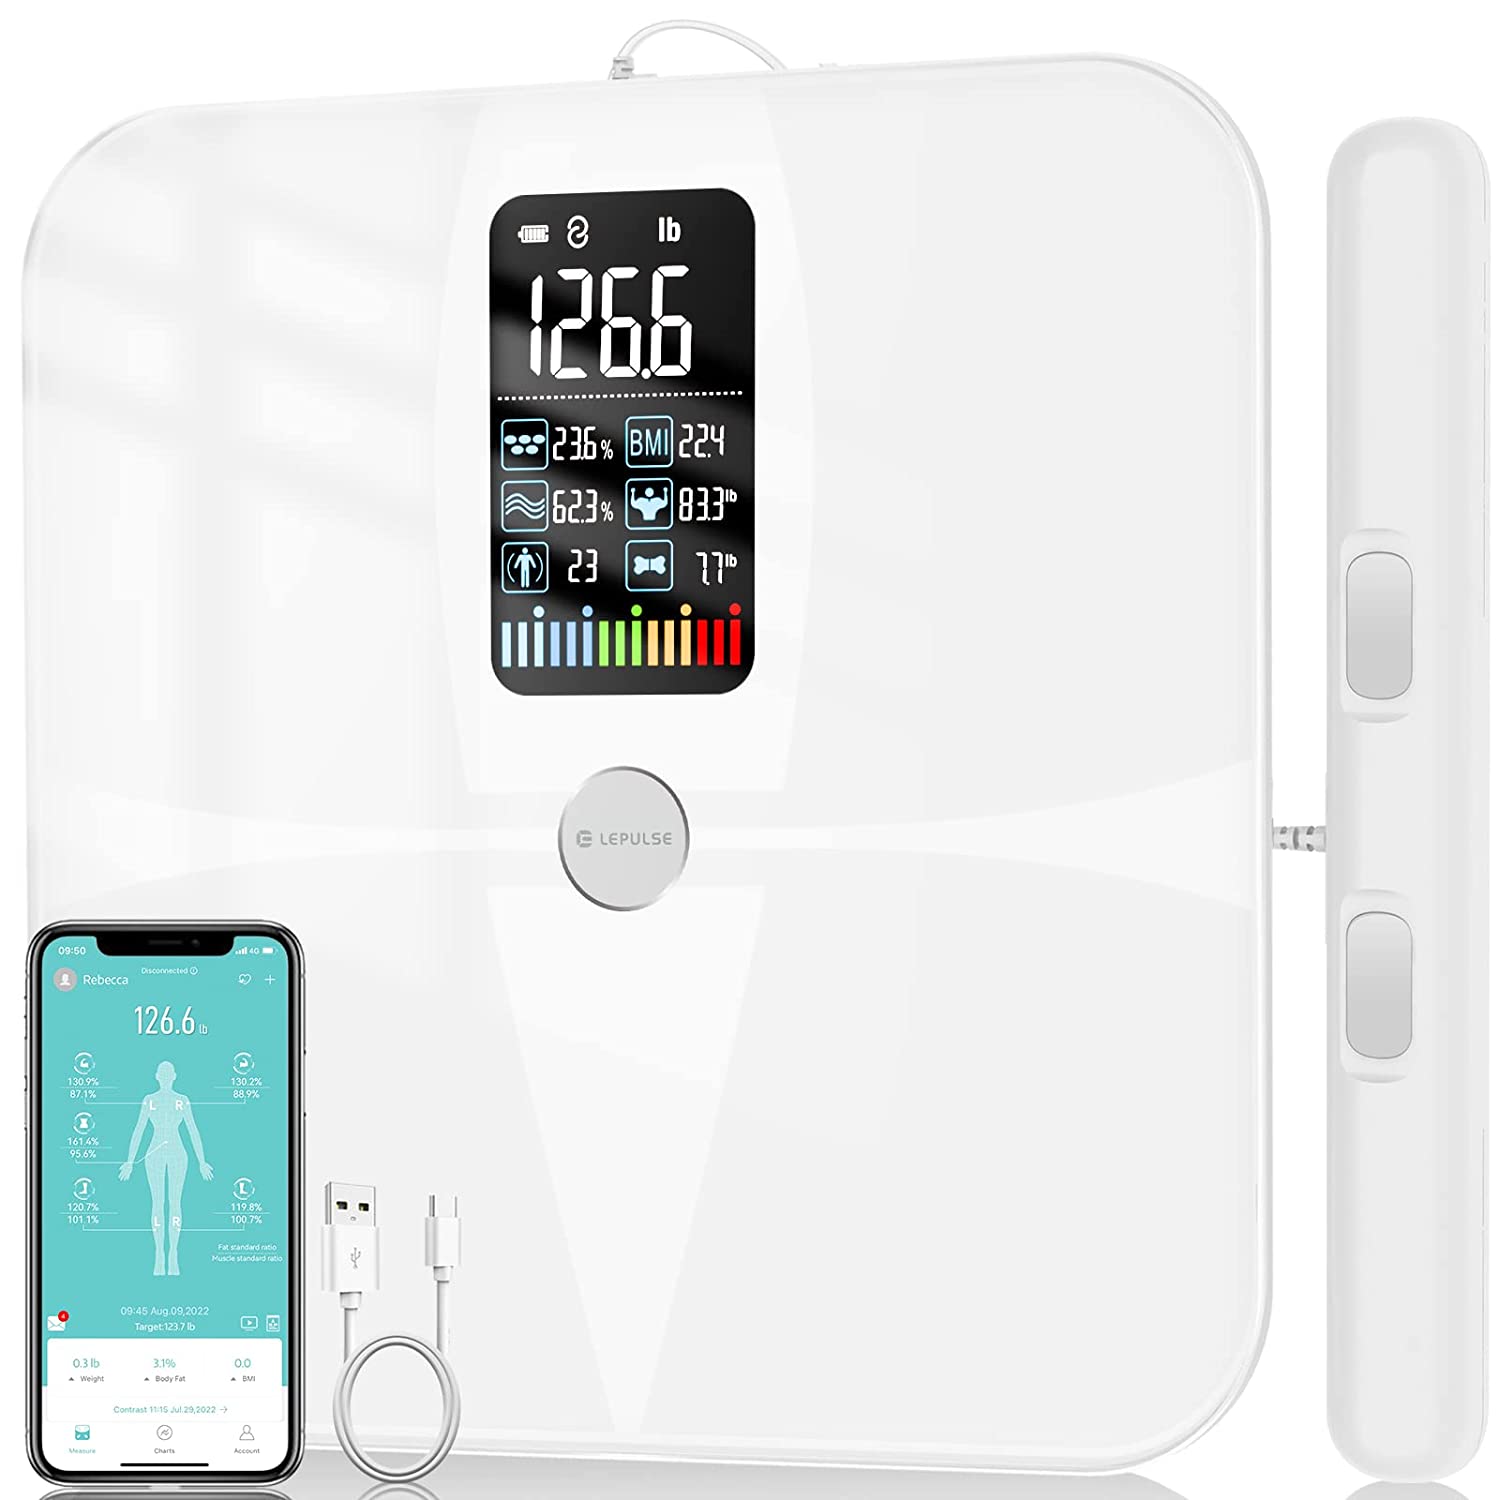  Scale for Body Weight, Lepulse Large Display Body Fat Scale,  High Accurate Digital Bathroom Scales for Weight, BMI Smart Weight Scale  with Body Fat Muscle Heart Rate, 15 Body Compositions with